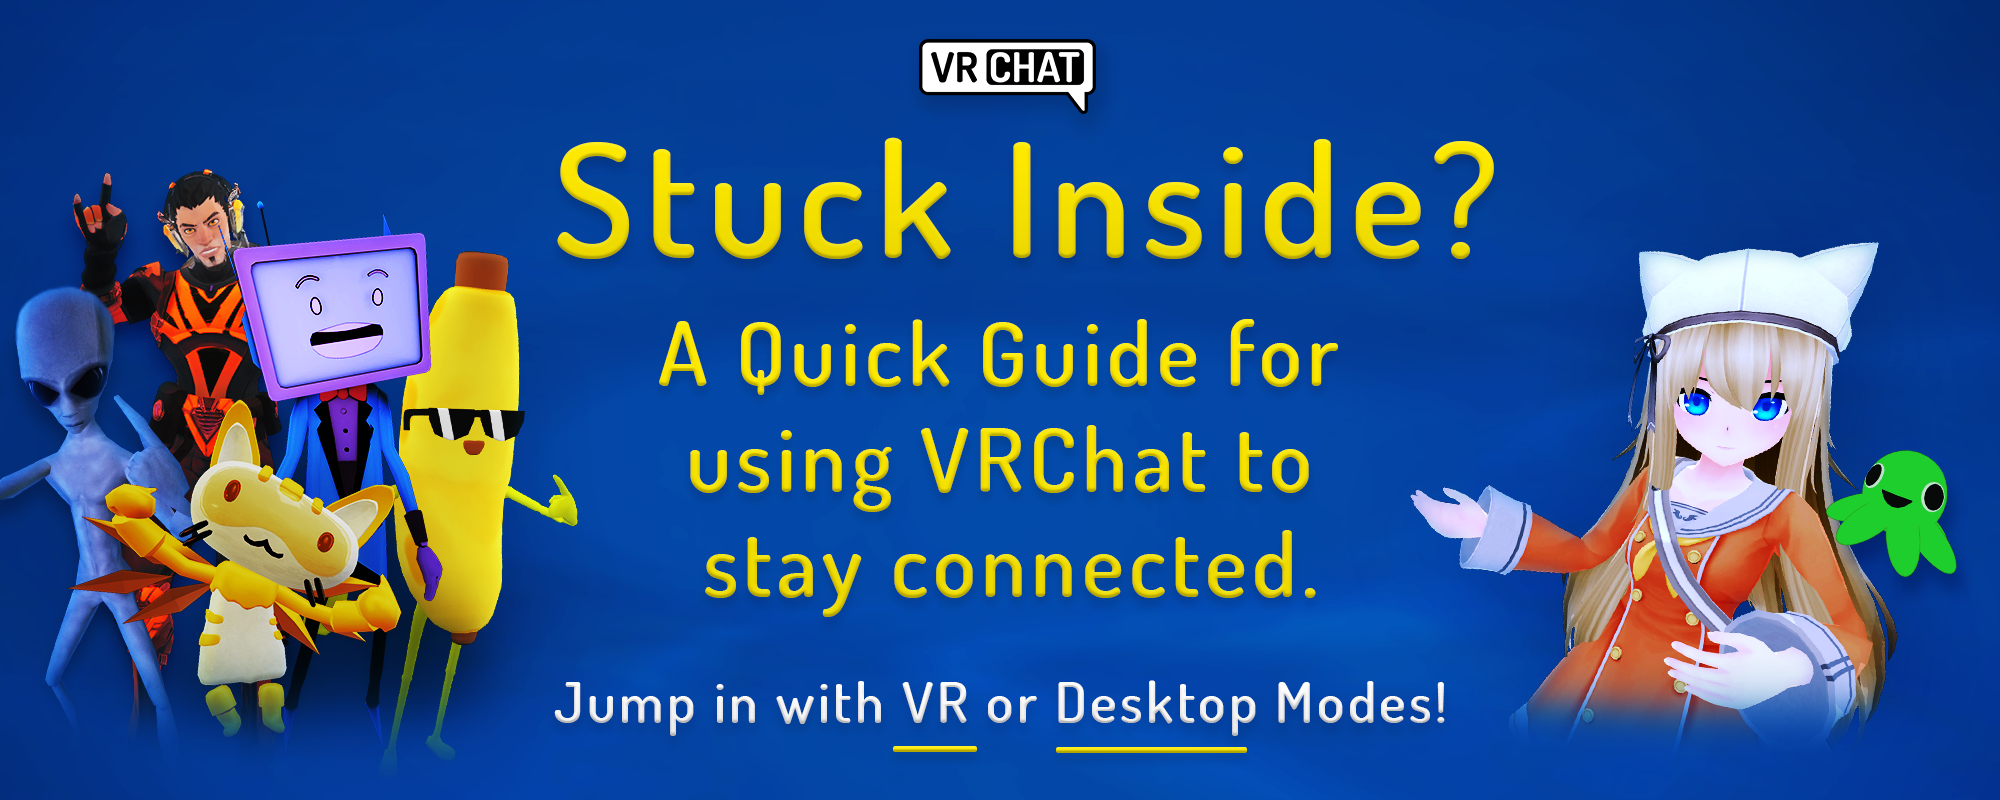 How To Log Out Of Vrchat Stuck Inside? A Quick Guide for using VRChat to Stay Connected | by Tupper  | VRChat | Medium